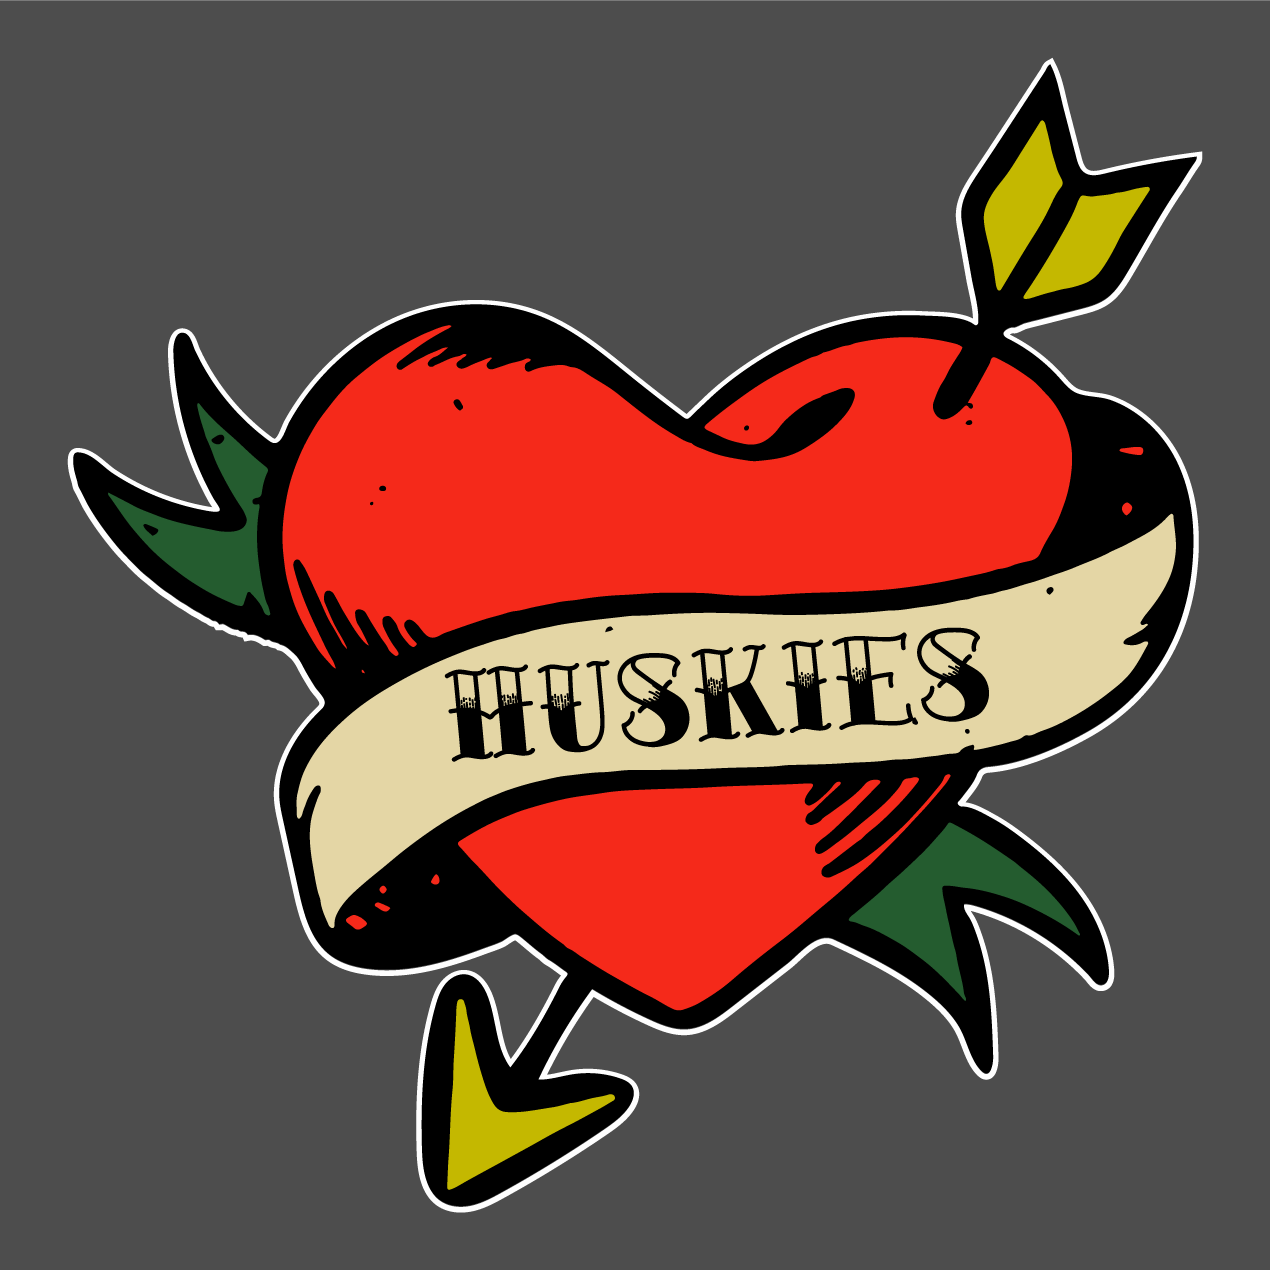 Have a Heart for Huskies! shirt design - zoomed